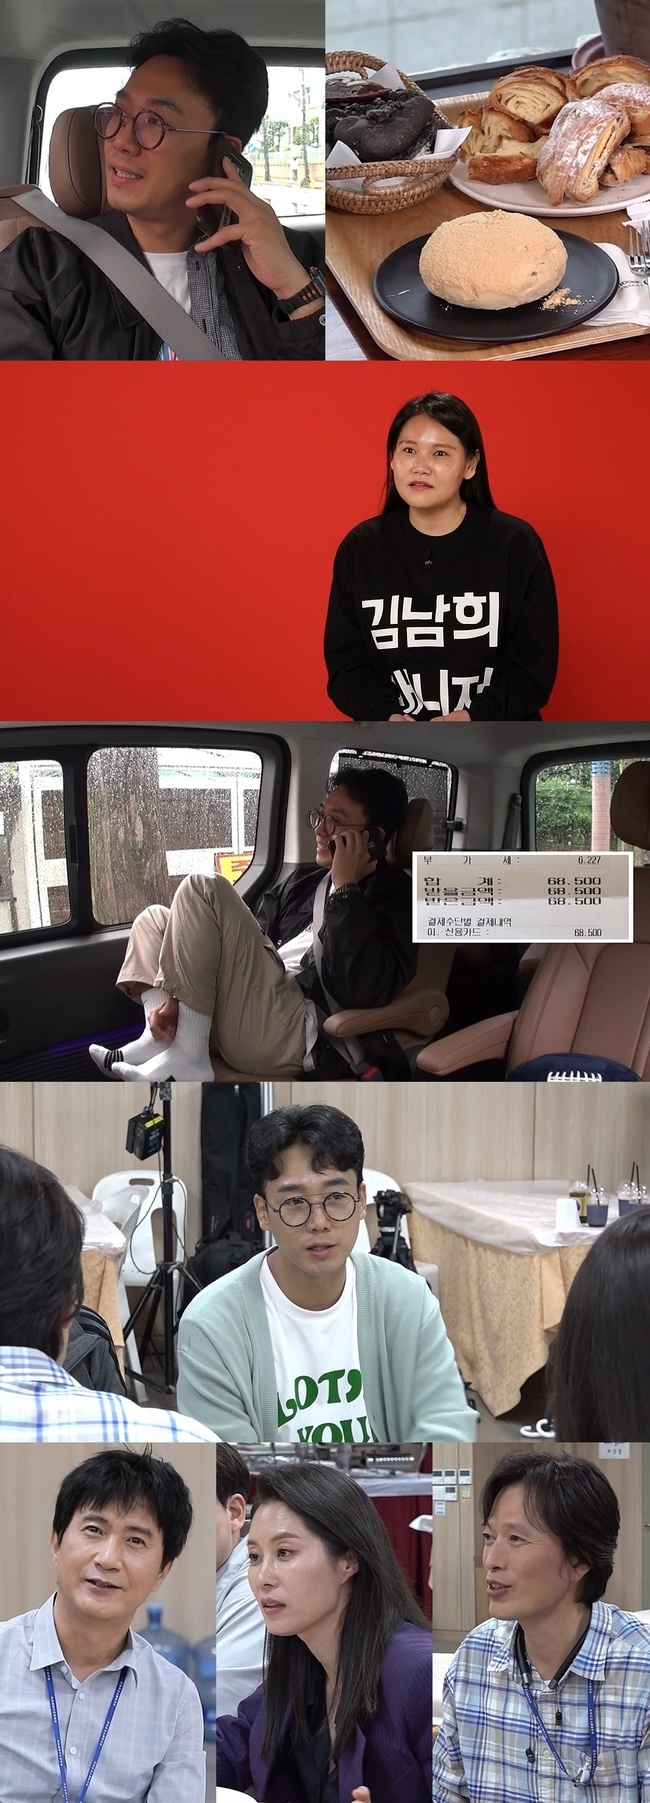 Kim Nam-hee unveils month allowanceKim Nam-hees real life is revealed at MBC Point of Omniscient Interfere broadcasted on June 12th.Kim Nam-hee stops at a bakery with Manager to open a bread flex, but the relaxation is also a moment.Soon Kim Nam-hee appears nervous, her lips trembling at the sudden call.Kim Nam-hee then swallows dry and receives a phone call and kindly explains the price of bread (?) to raise questions.It turns out Kim Nam-hees month allowance was a shocking amount.Manager said, When you were Calculating a few thousand won, you received a Share-alike by phone.Who is Kim Nam-hee to receive Share-alike? The audiences curiosity amplifies what the story of allowance is.